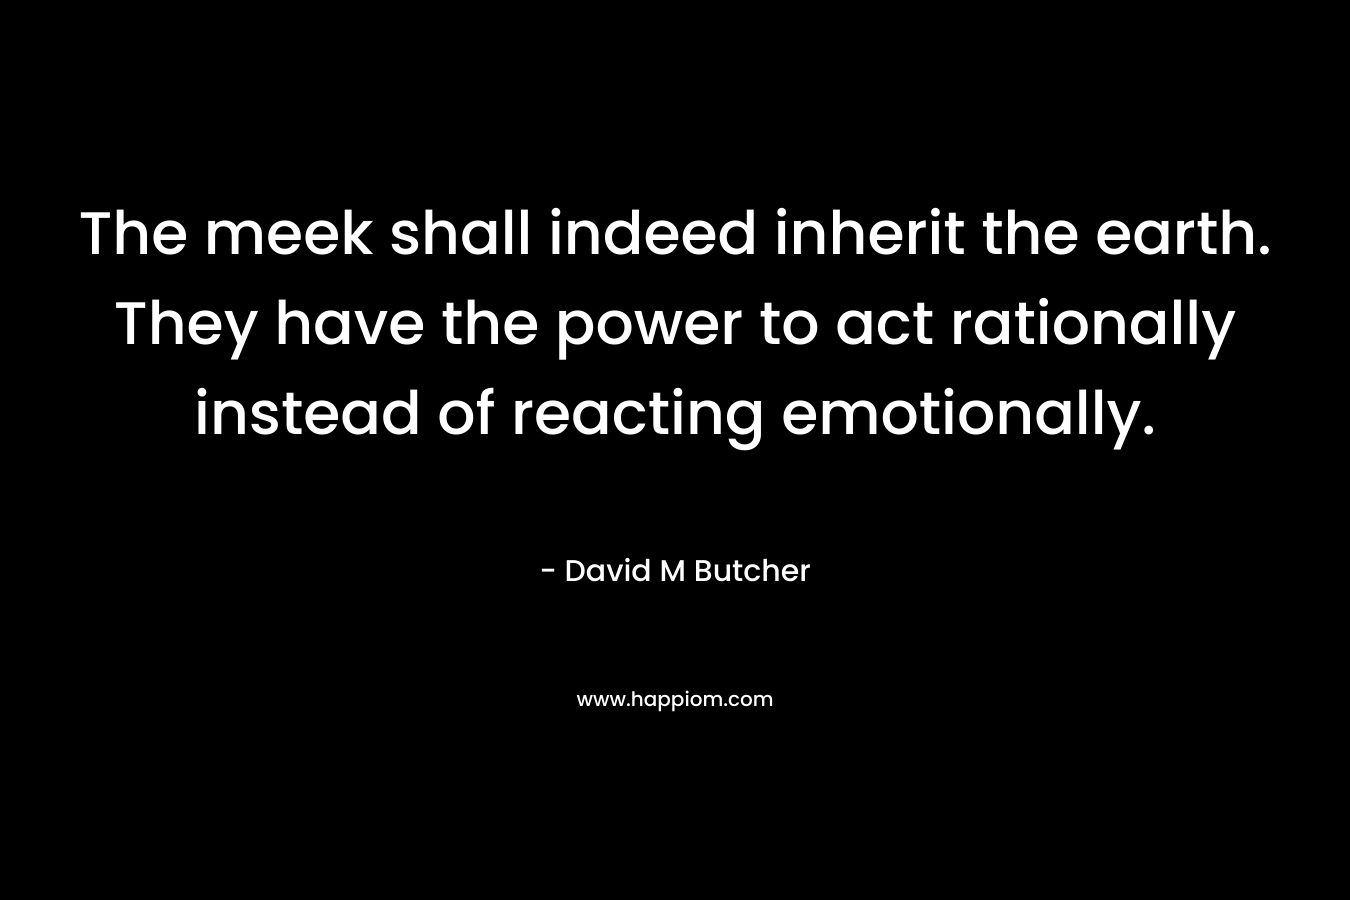 The meek shall indeed inherit the earth. They have the power to act rationally instead of reacting emotionally. – David M Butcher